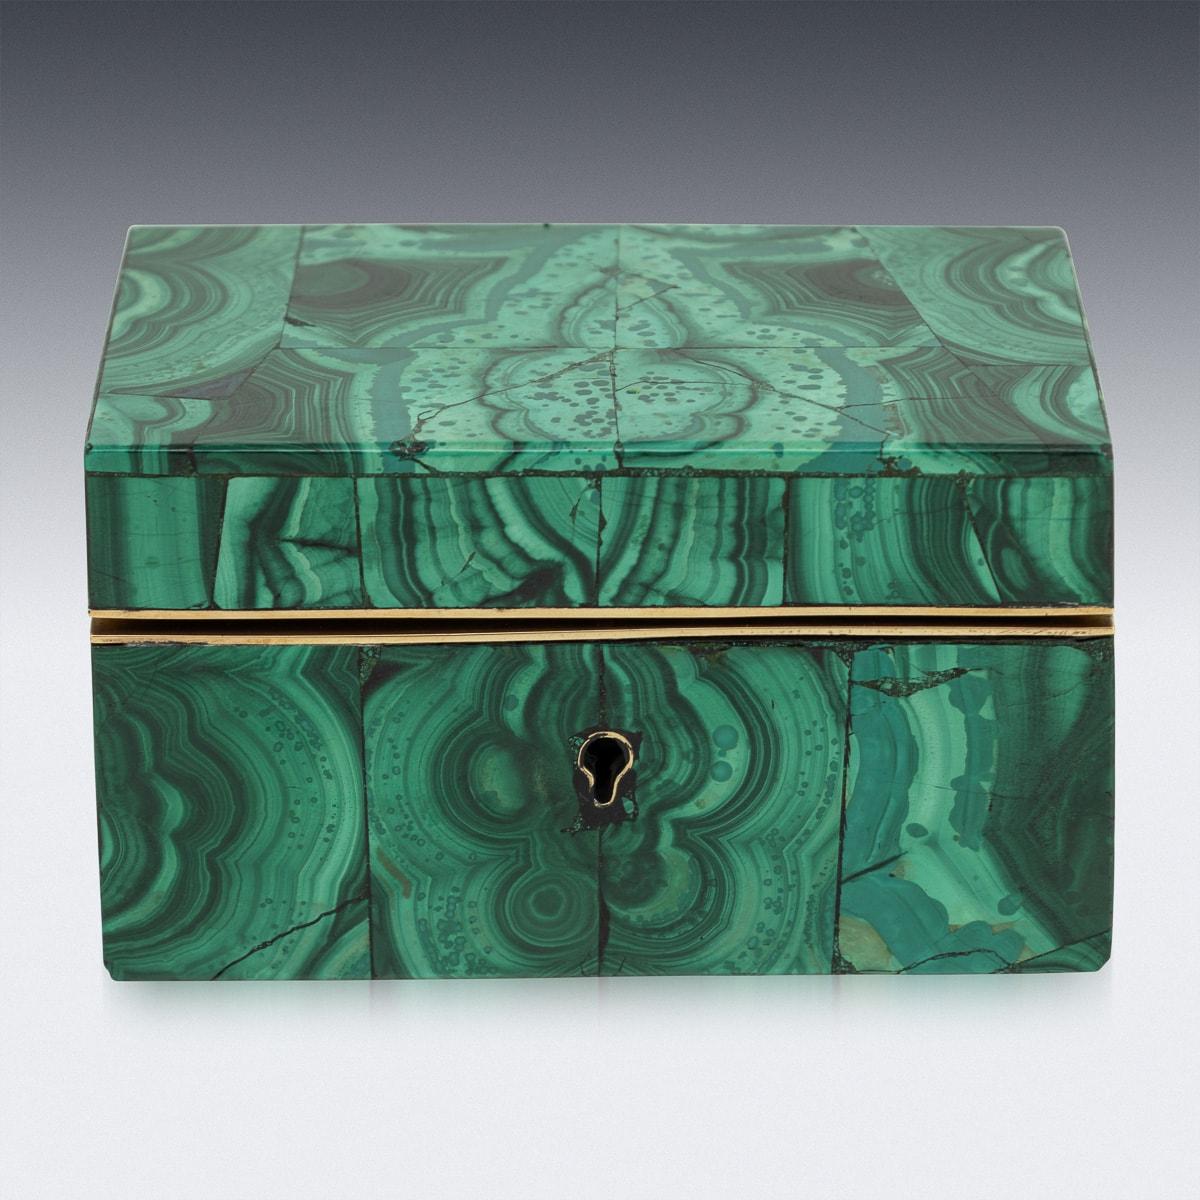 Antique late 19th Century malachite box. This box features malachite pieces throughout the whole outer body with brass details. Inside, the original soft suede lining. This box serves not only as a perfect accessory for jewellery or other treasures